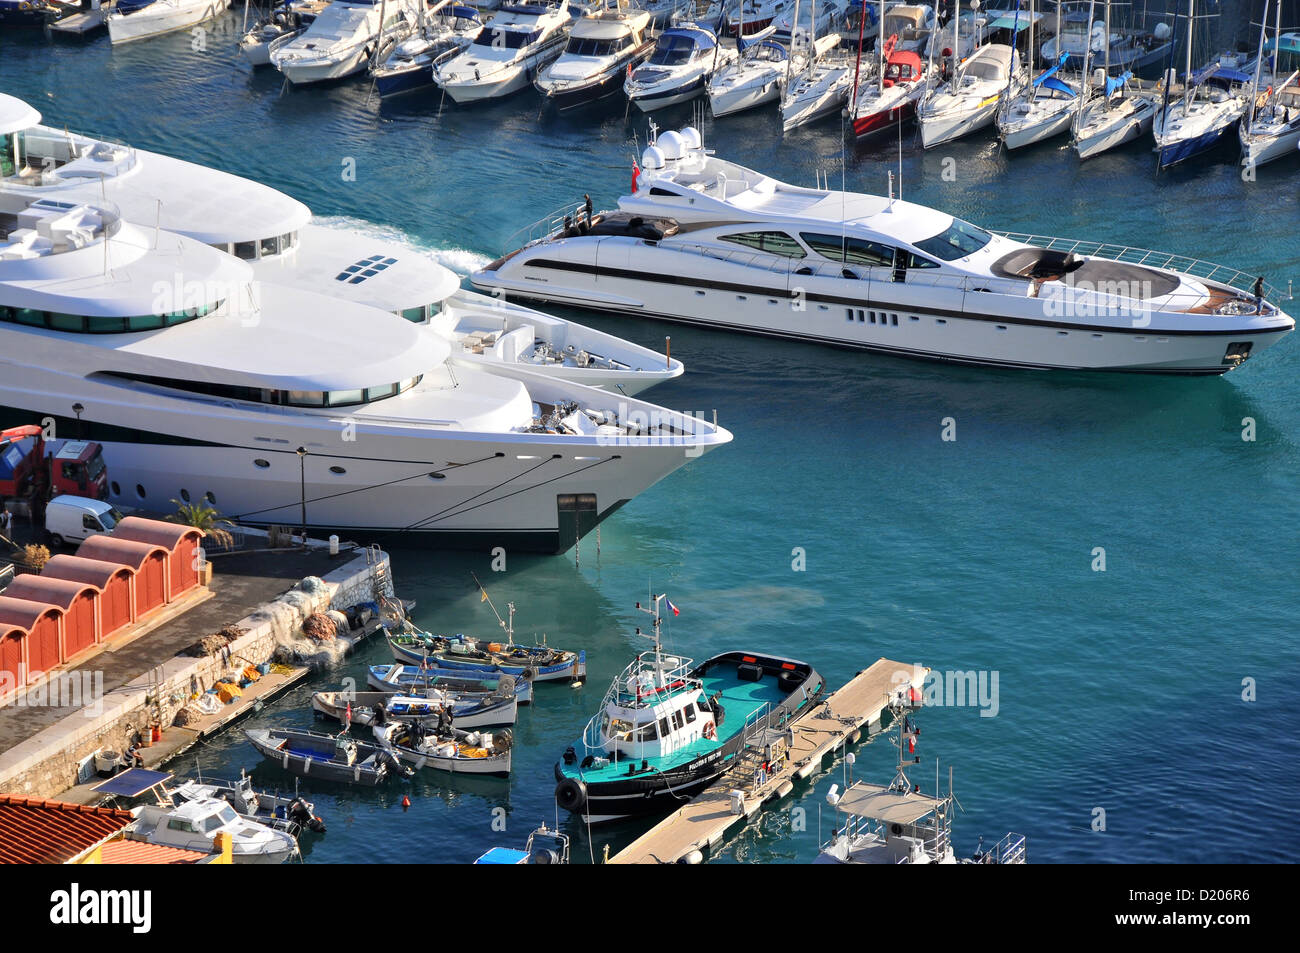 View of boats in the Bassin Lympia, Nice, Cote d'Azur, South France, Europe Stock Photo